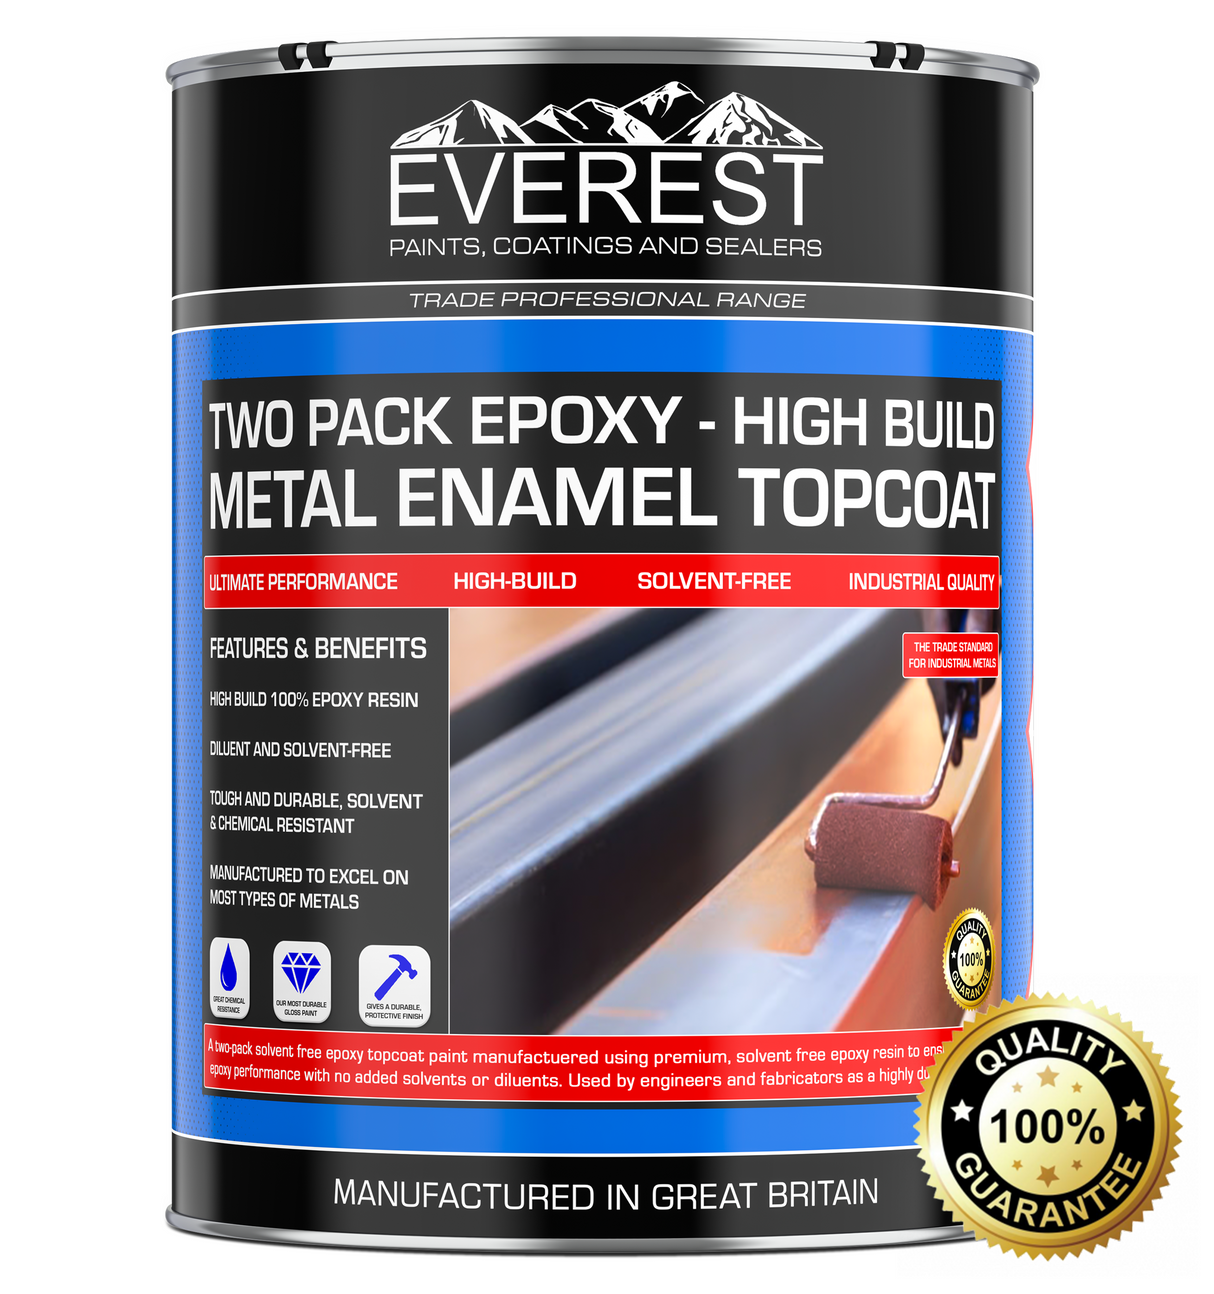 Everest Paints - Epoxy Metal Topcoat Paint - Solvent-Free Two Pack Epoxy